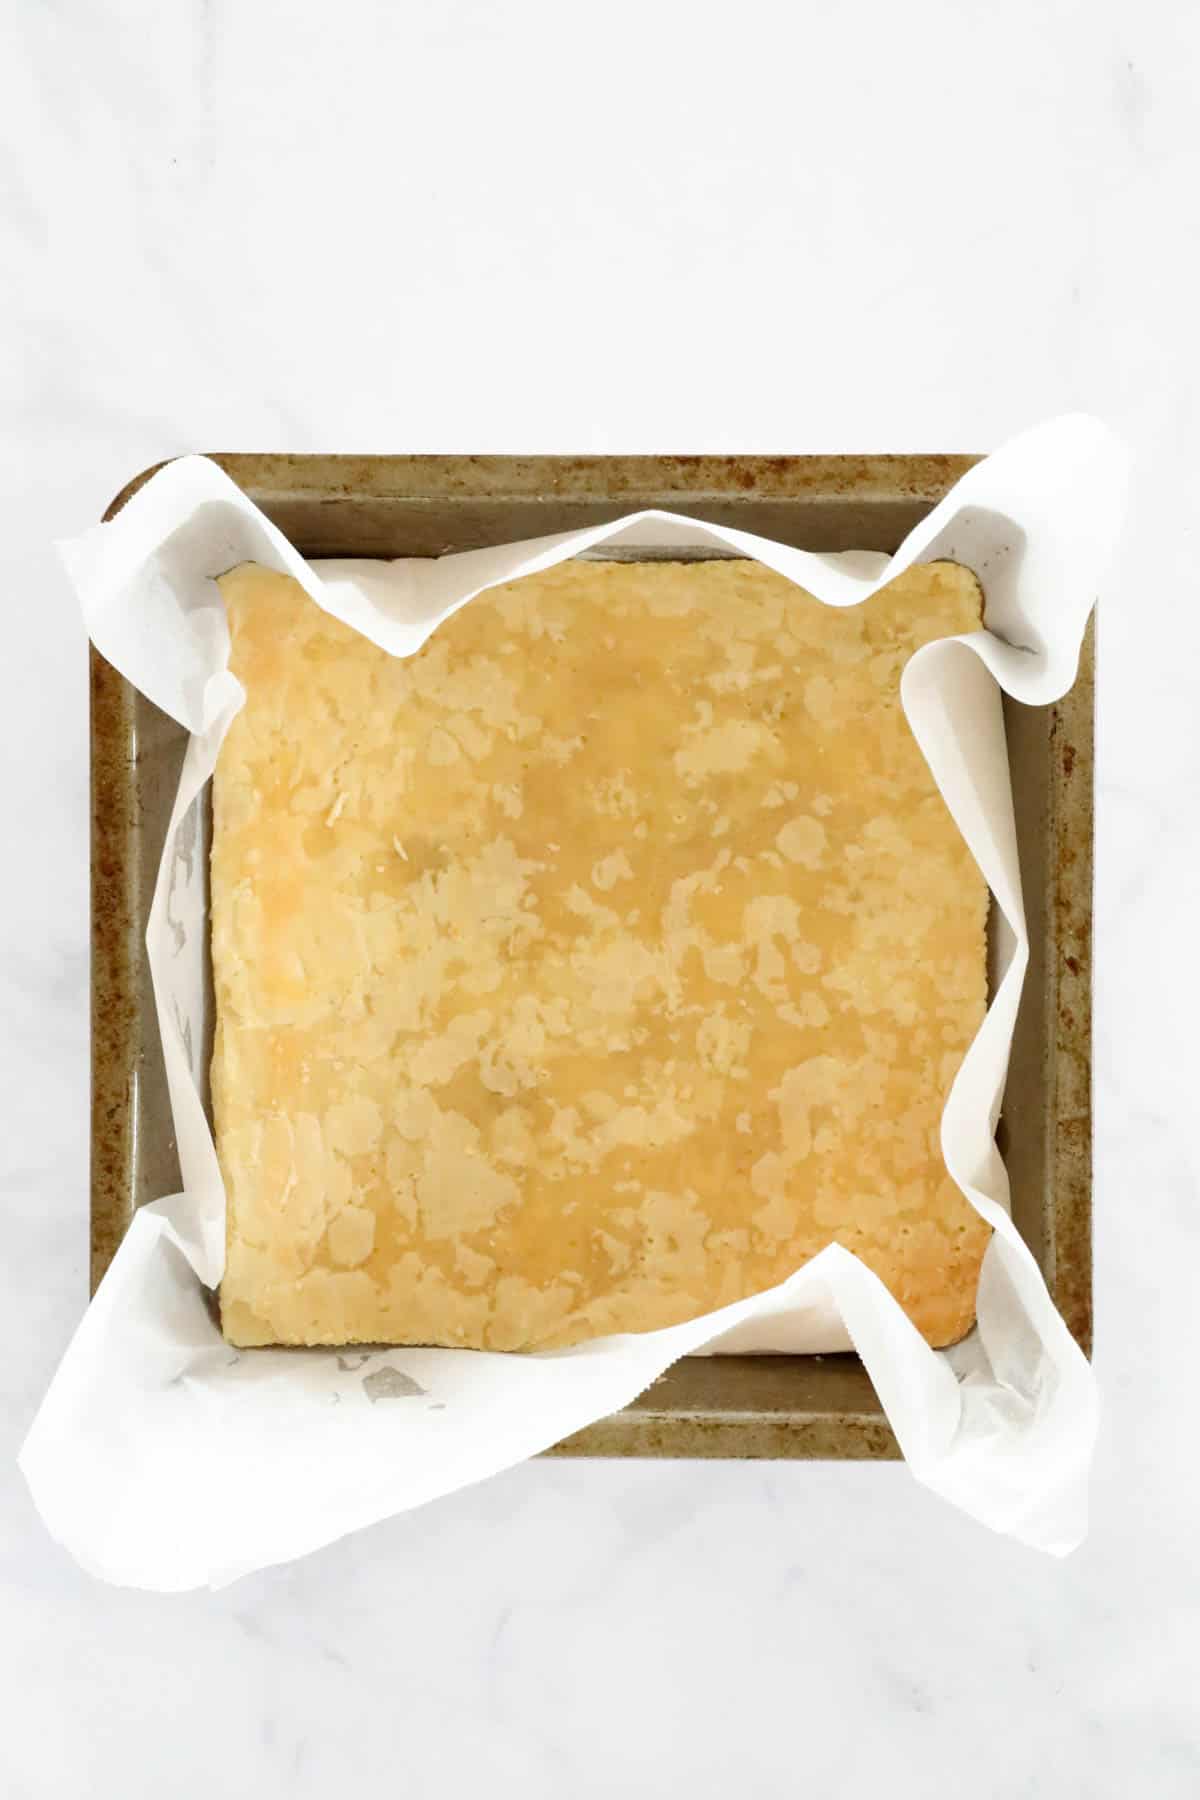 A sheet of baked puff pastry placed on the base of a square lined baking tin.